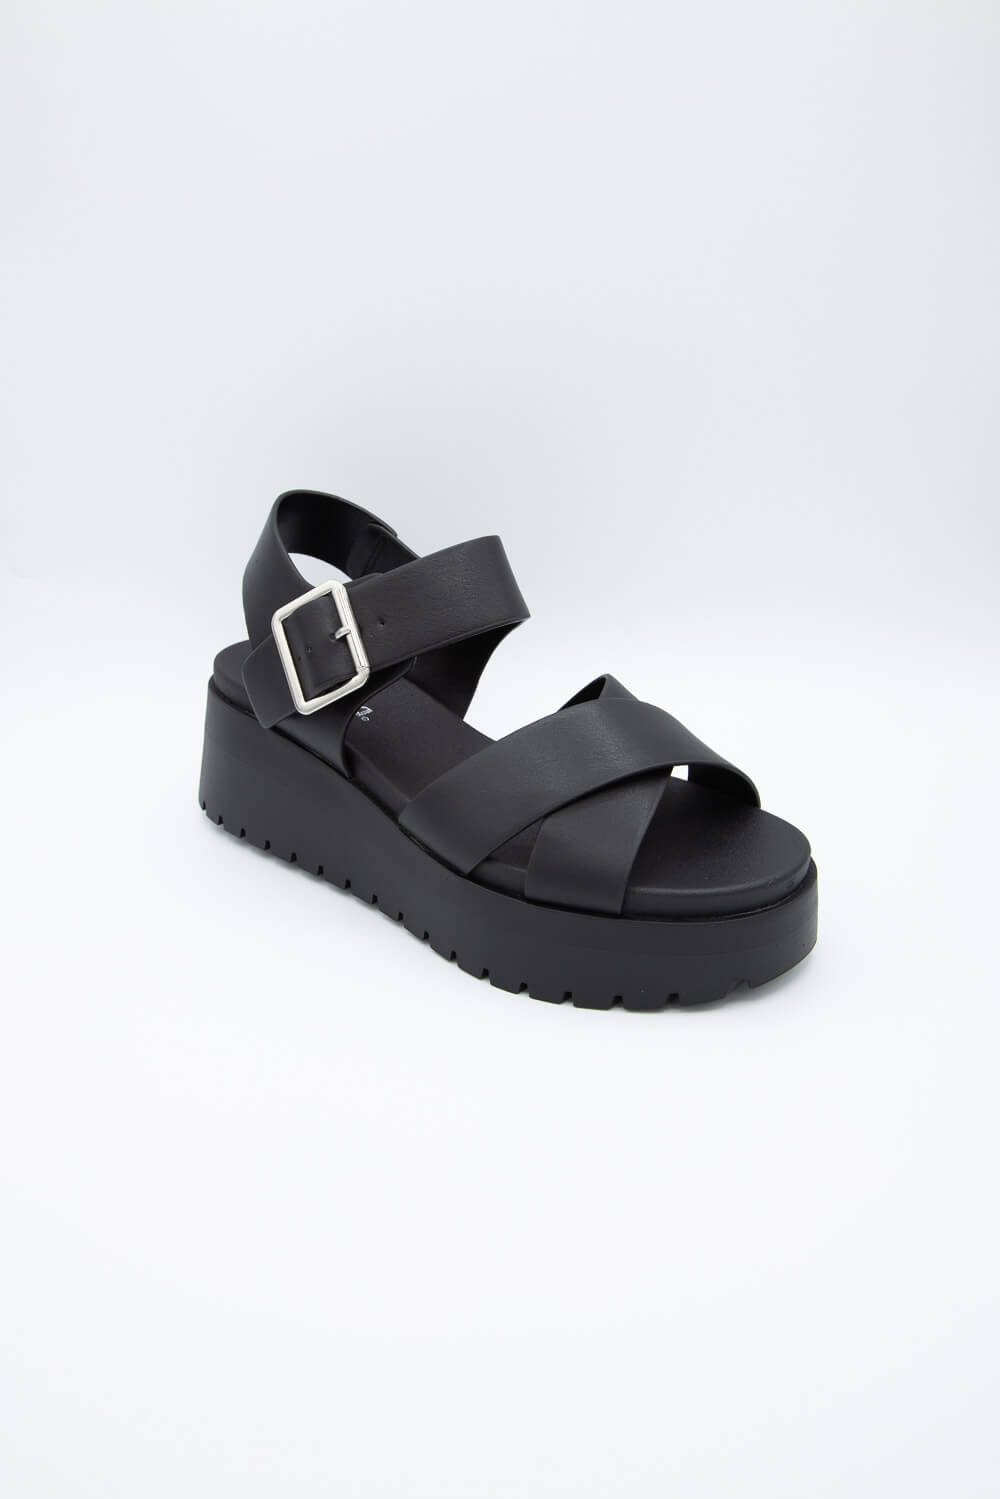 Antares Black Leather Wedge Strappy Sandal - band of the free